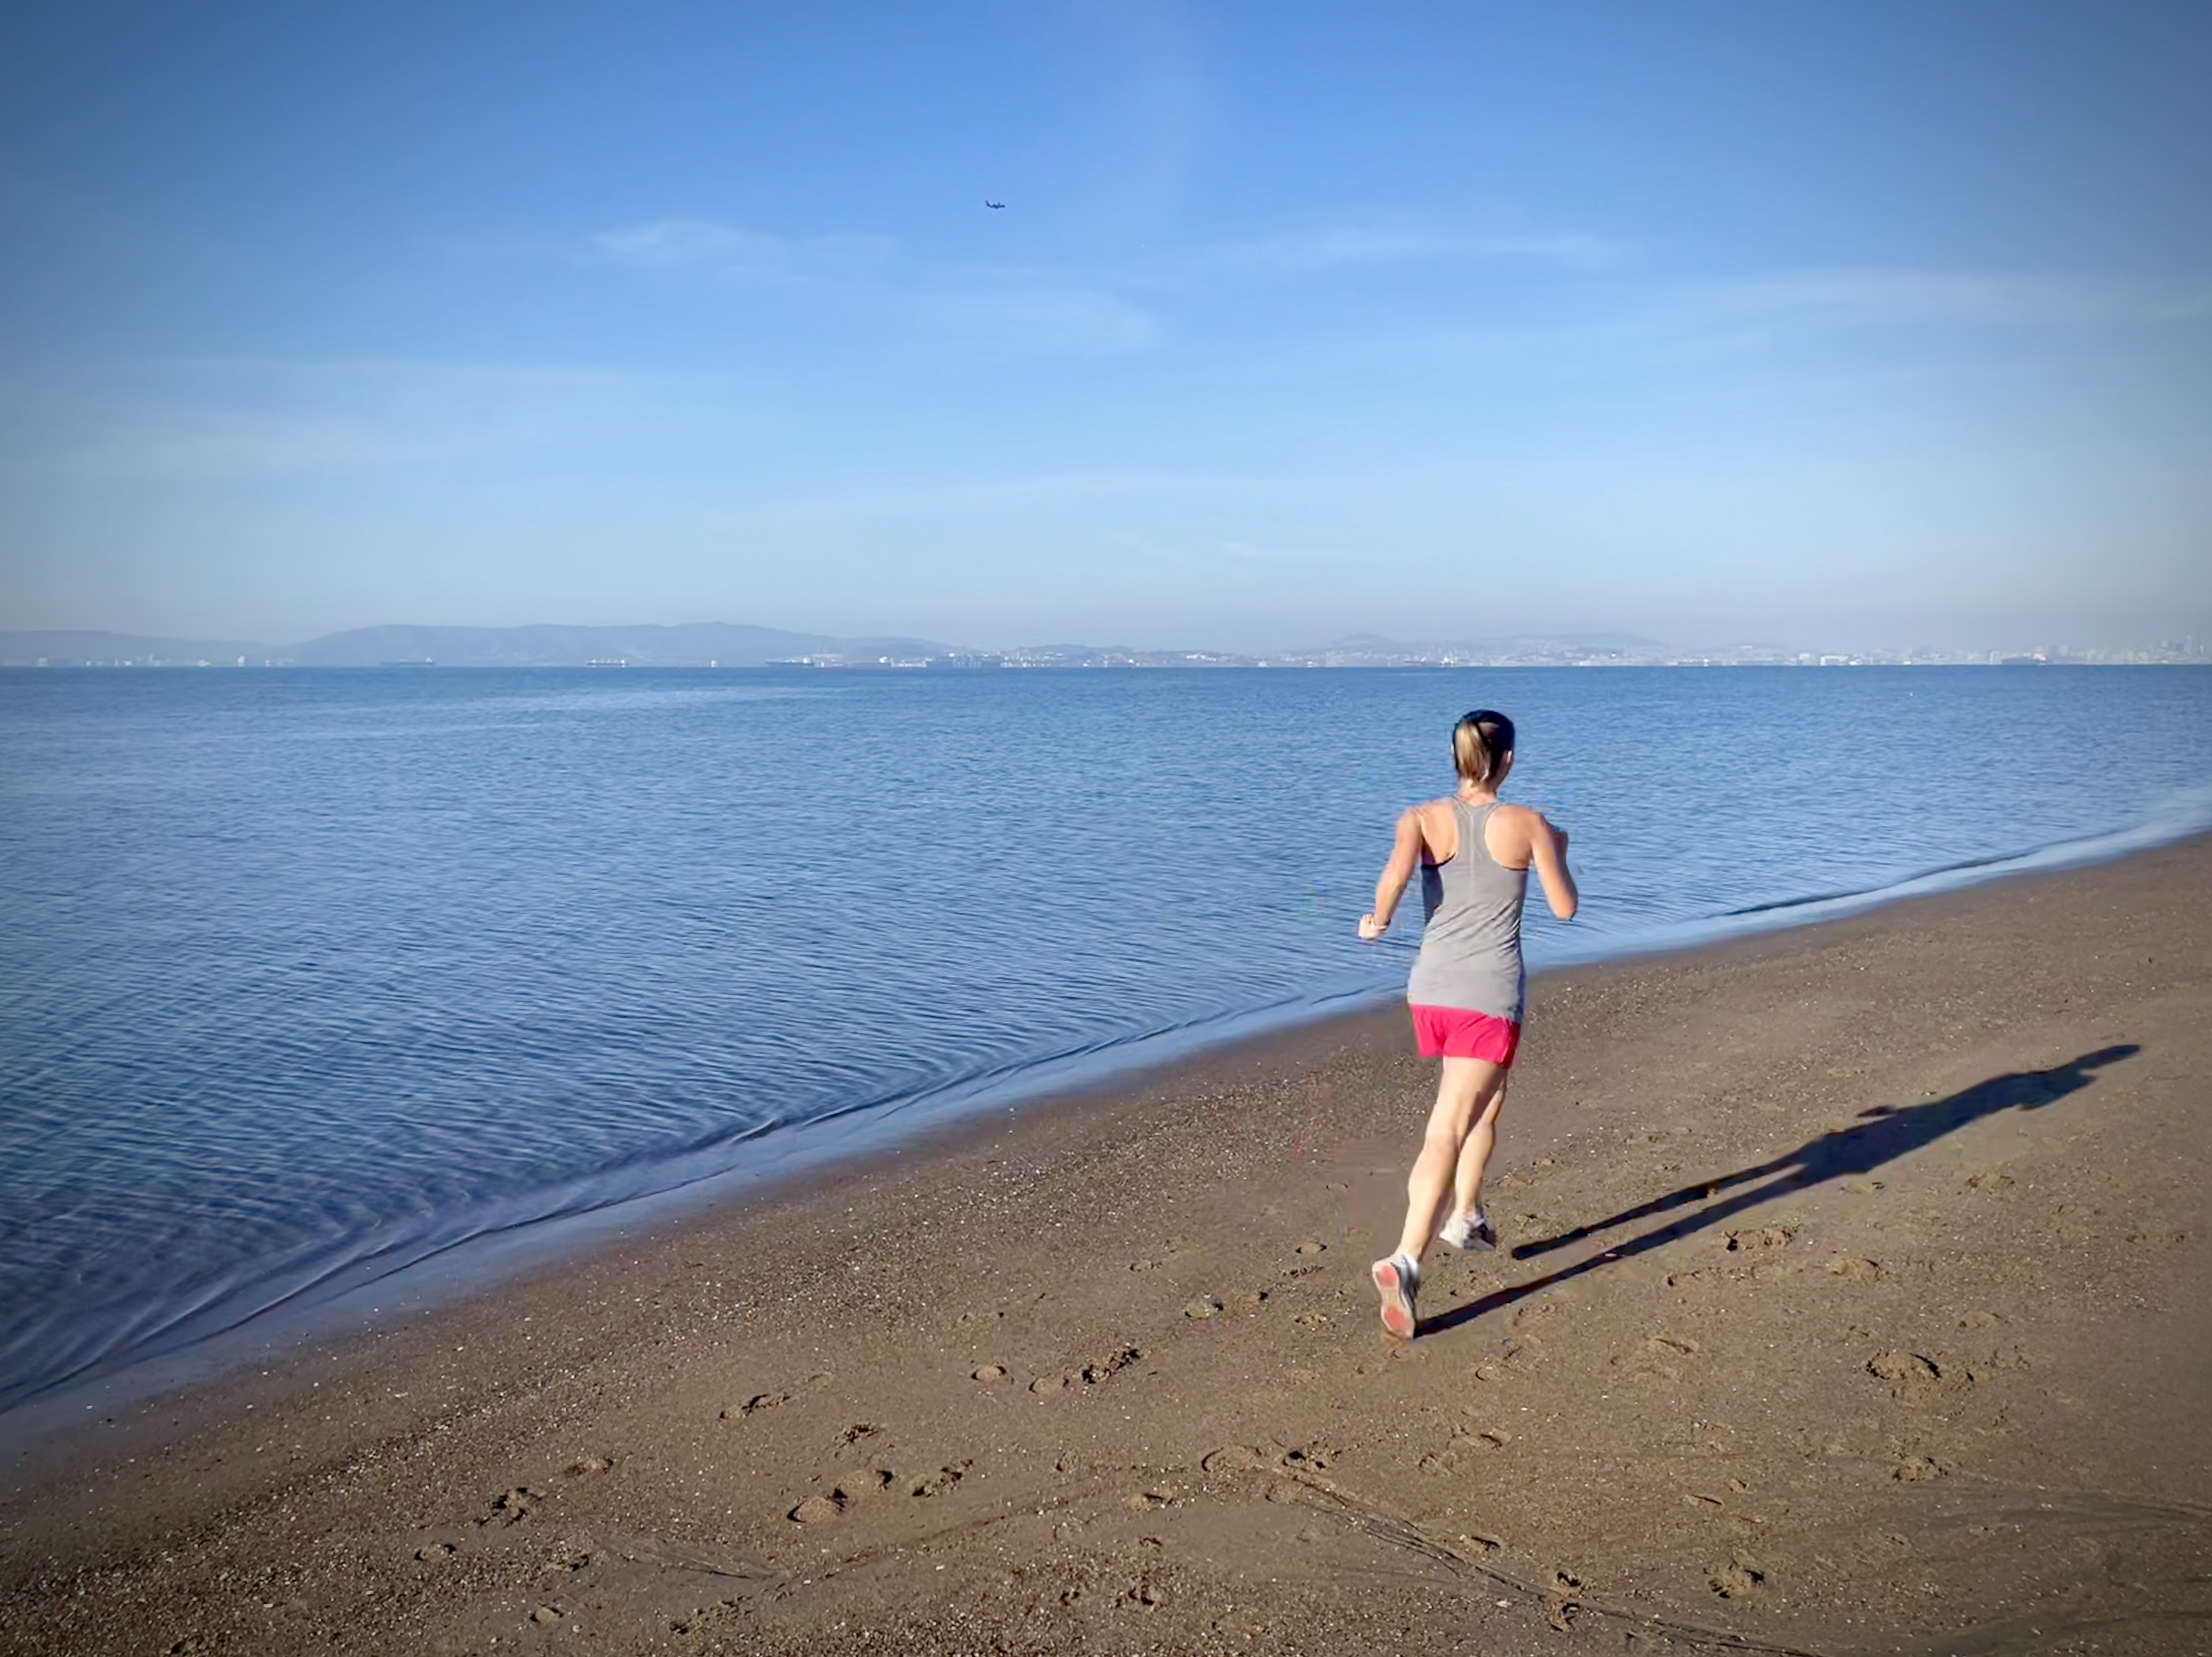 Person running on beach towards horizon. It's morning, clear cky, blue ocean. You can see mountains far off in the distance.